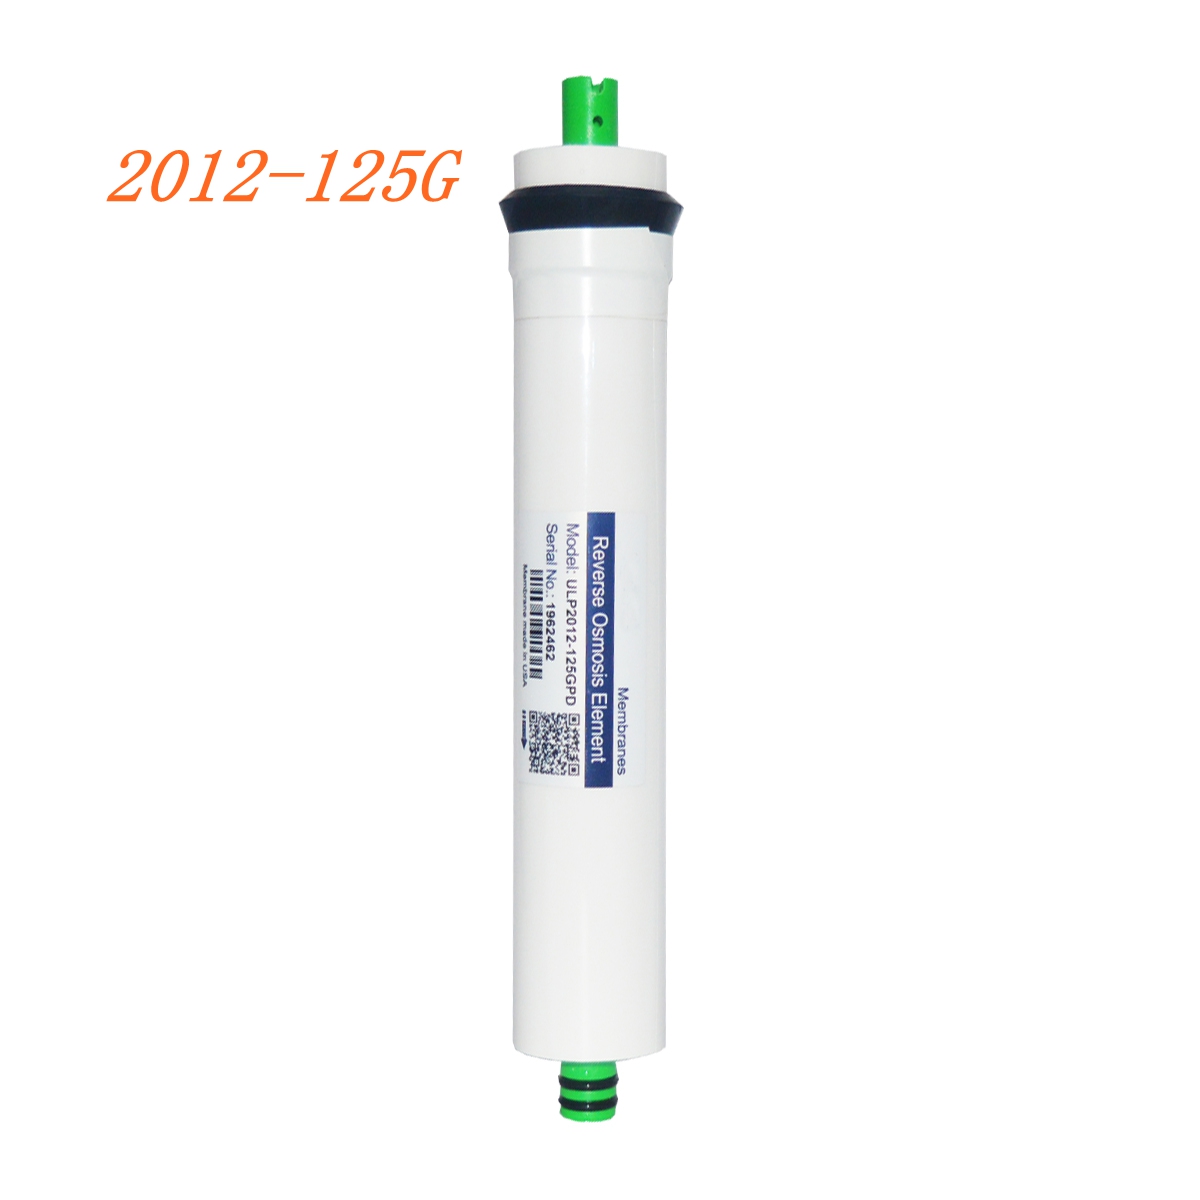 Reverse-Osmosis-Membrane-Replacement-RO-Water-System-Filter-5075100125150400G-1425879-7